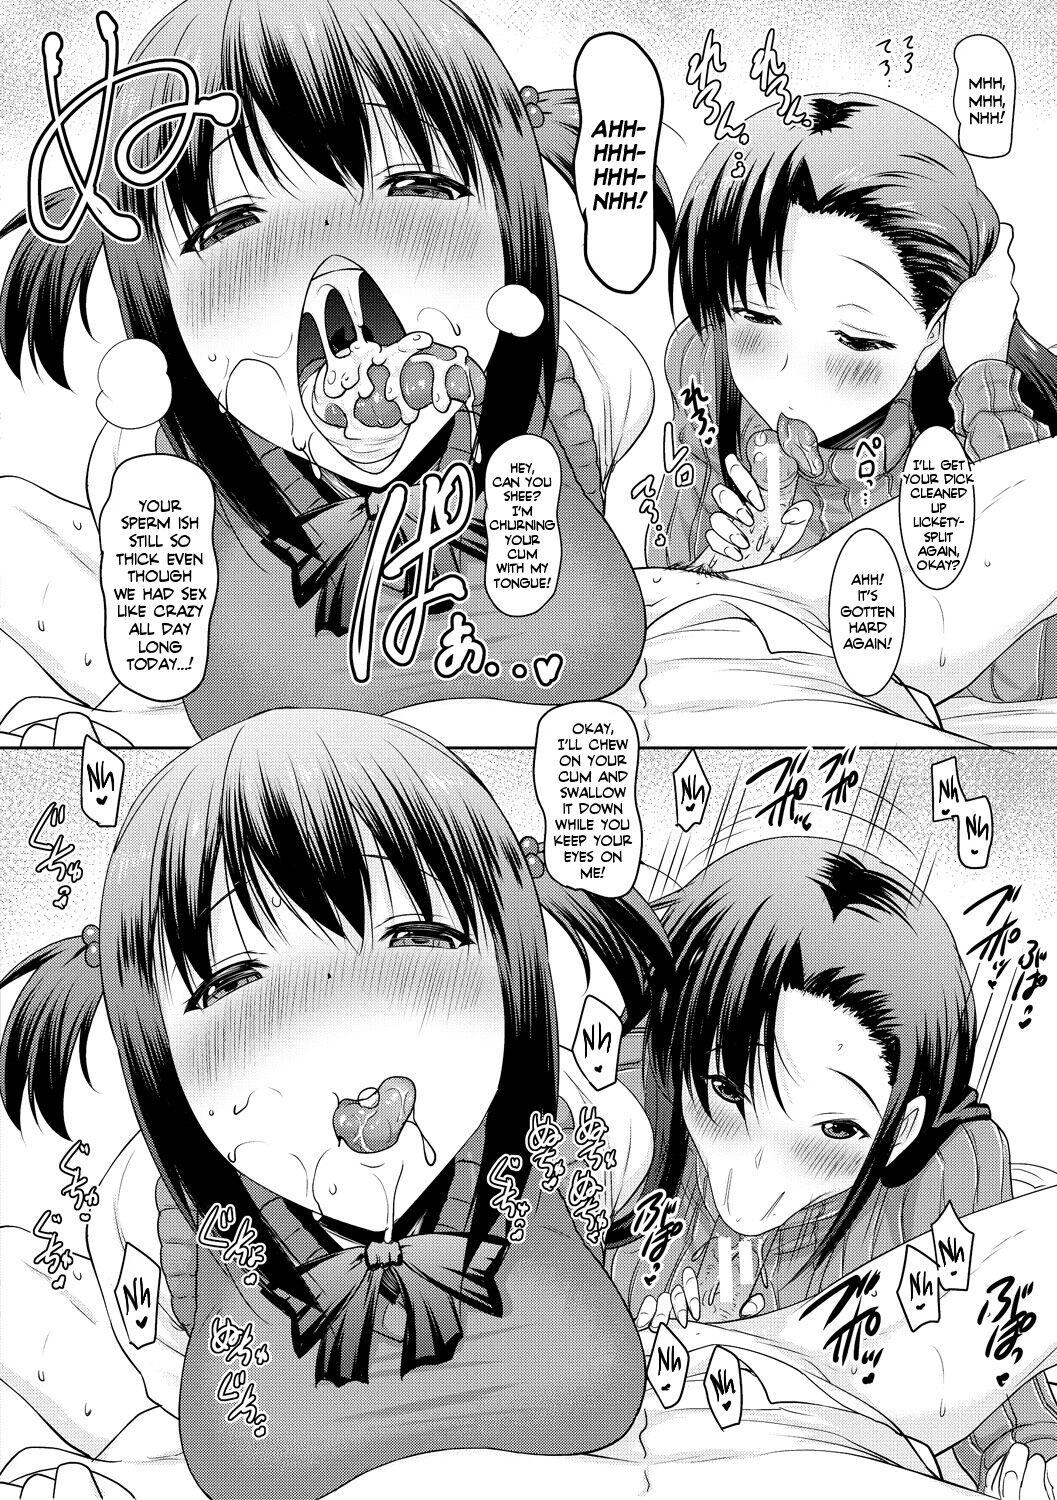 [Pony-R] I Can't Live Without My Little Sister's Tongue Chapter 01-02 + Secret Baby-making Sex with a Big-titted Mother and Daughter! (Kyonyuu Oyako no Shita to Shikyuu ni Renzoku Shasei) [English] [Team Rabu2] [Digital] 54